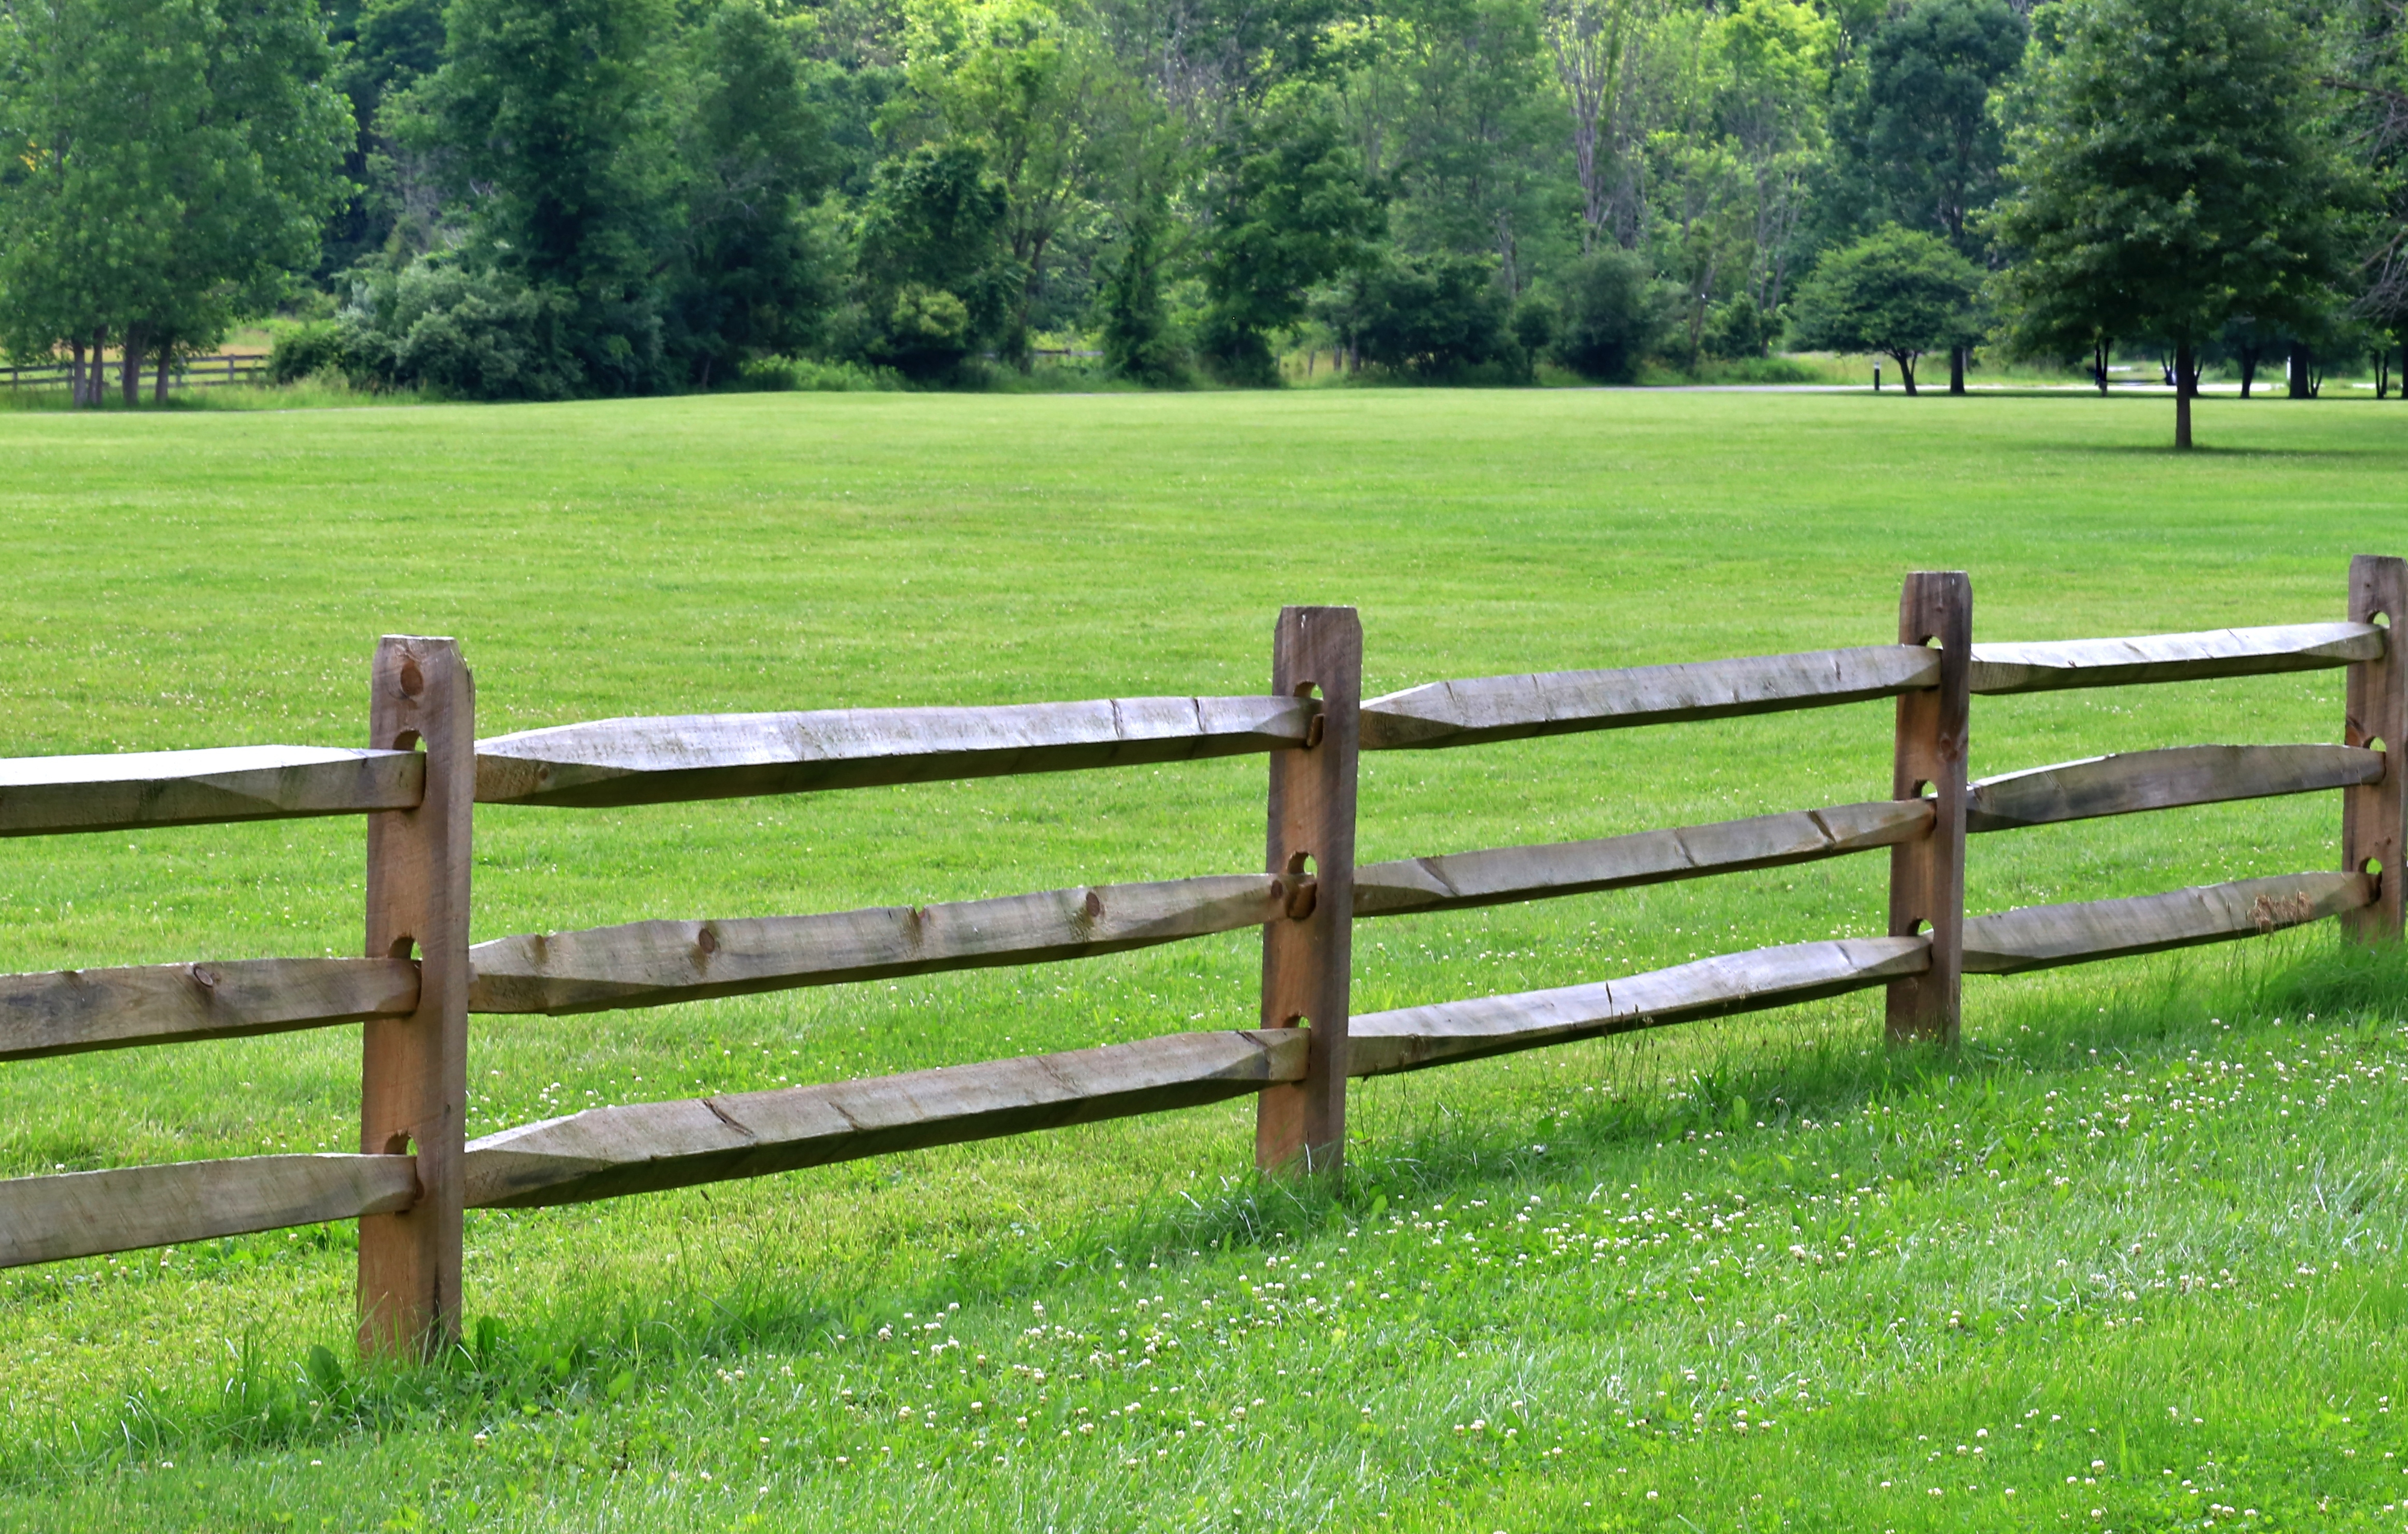 Fence on a large grassy field